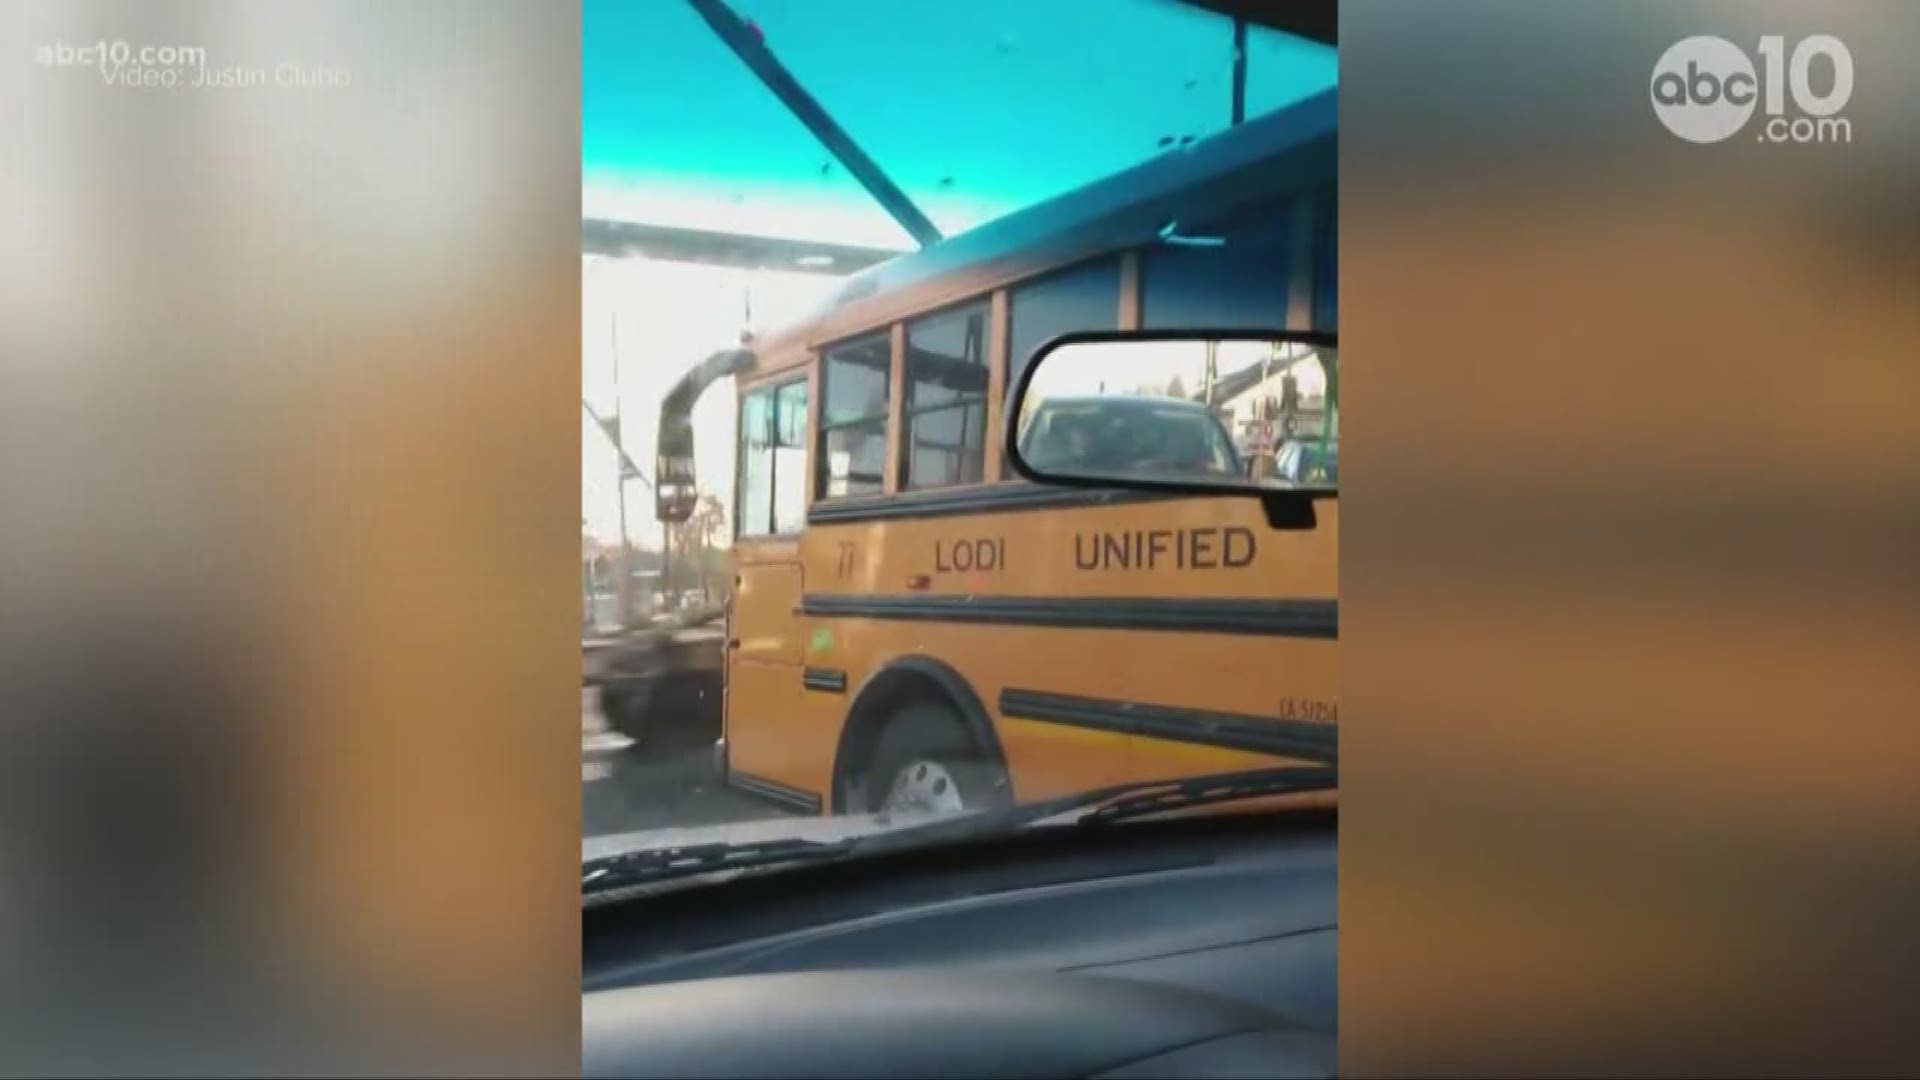 Lodi Unified School District officials confirmed that there was a child on the bus at the time, but the child was not hurt.